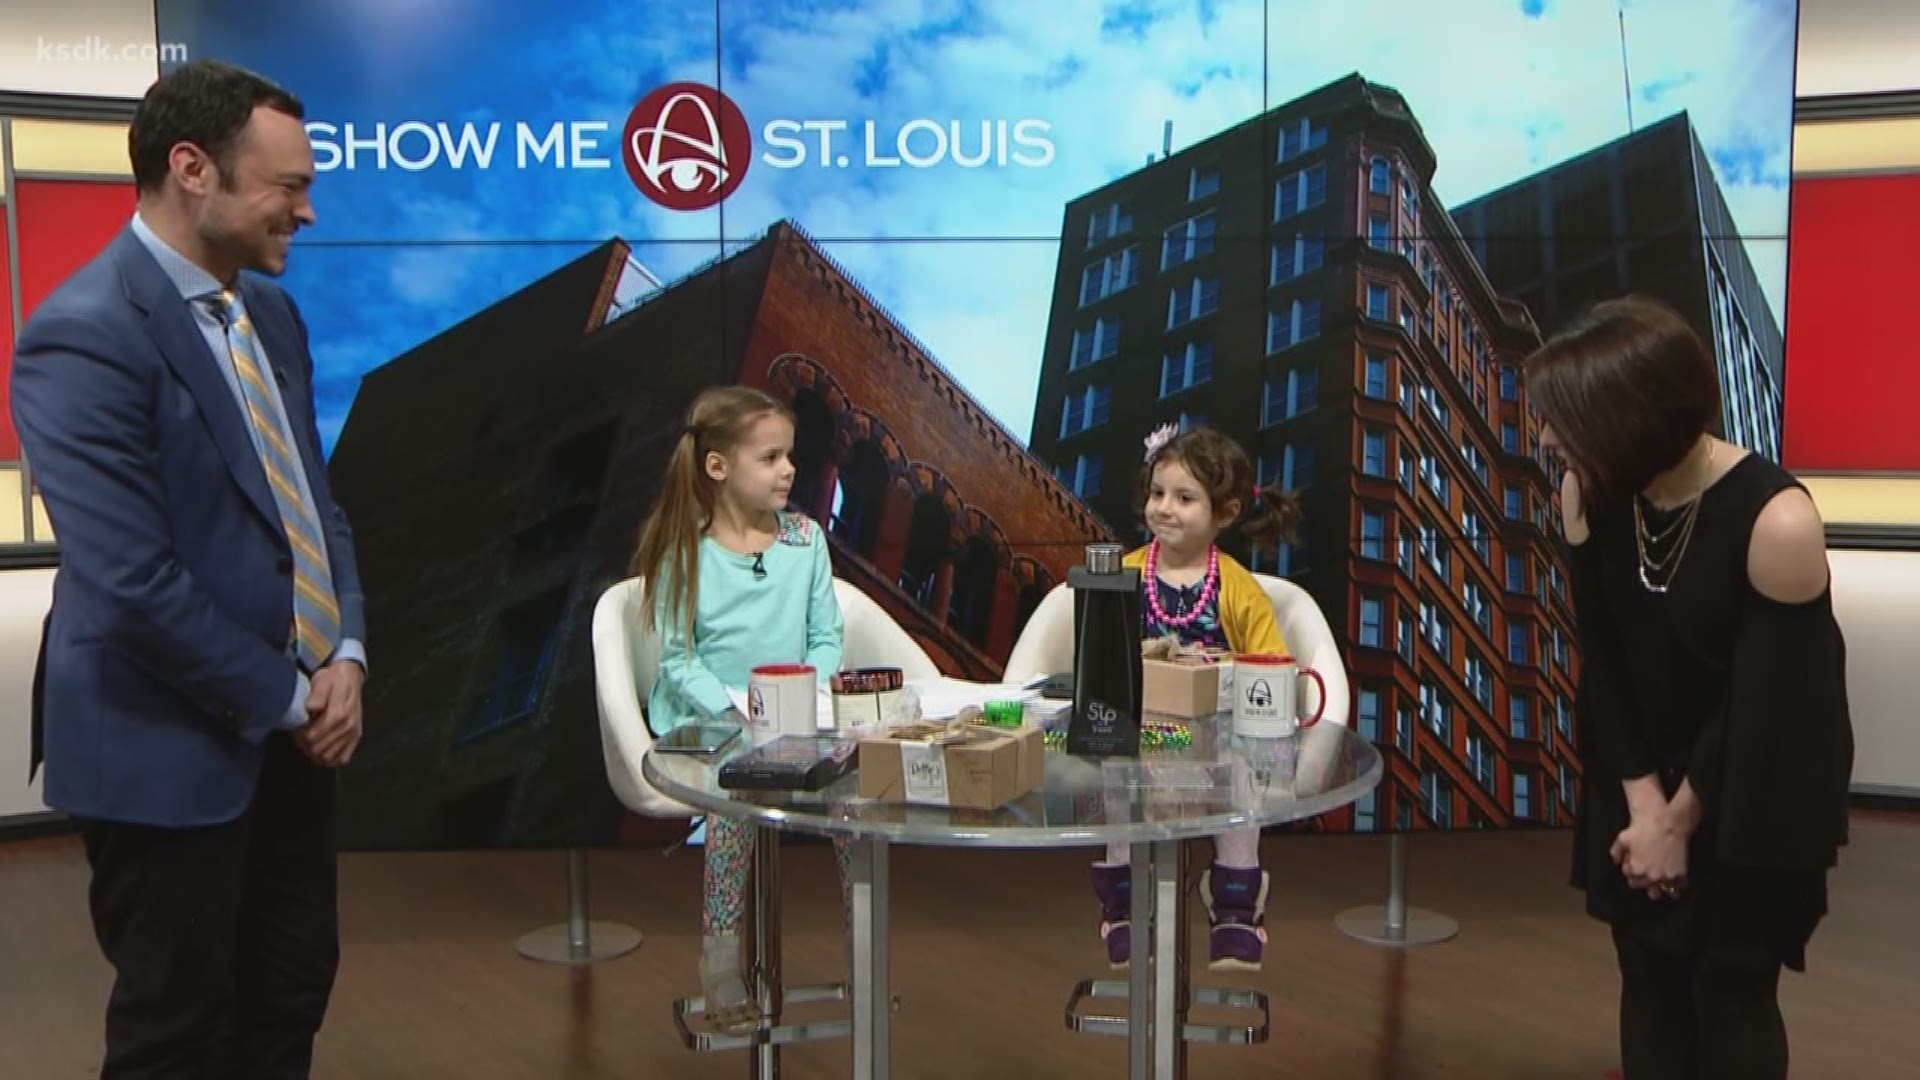 Penelope and Norah are new members of the production who stopped by Show Me St. Louis.